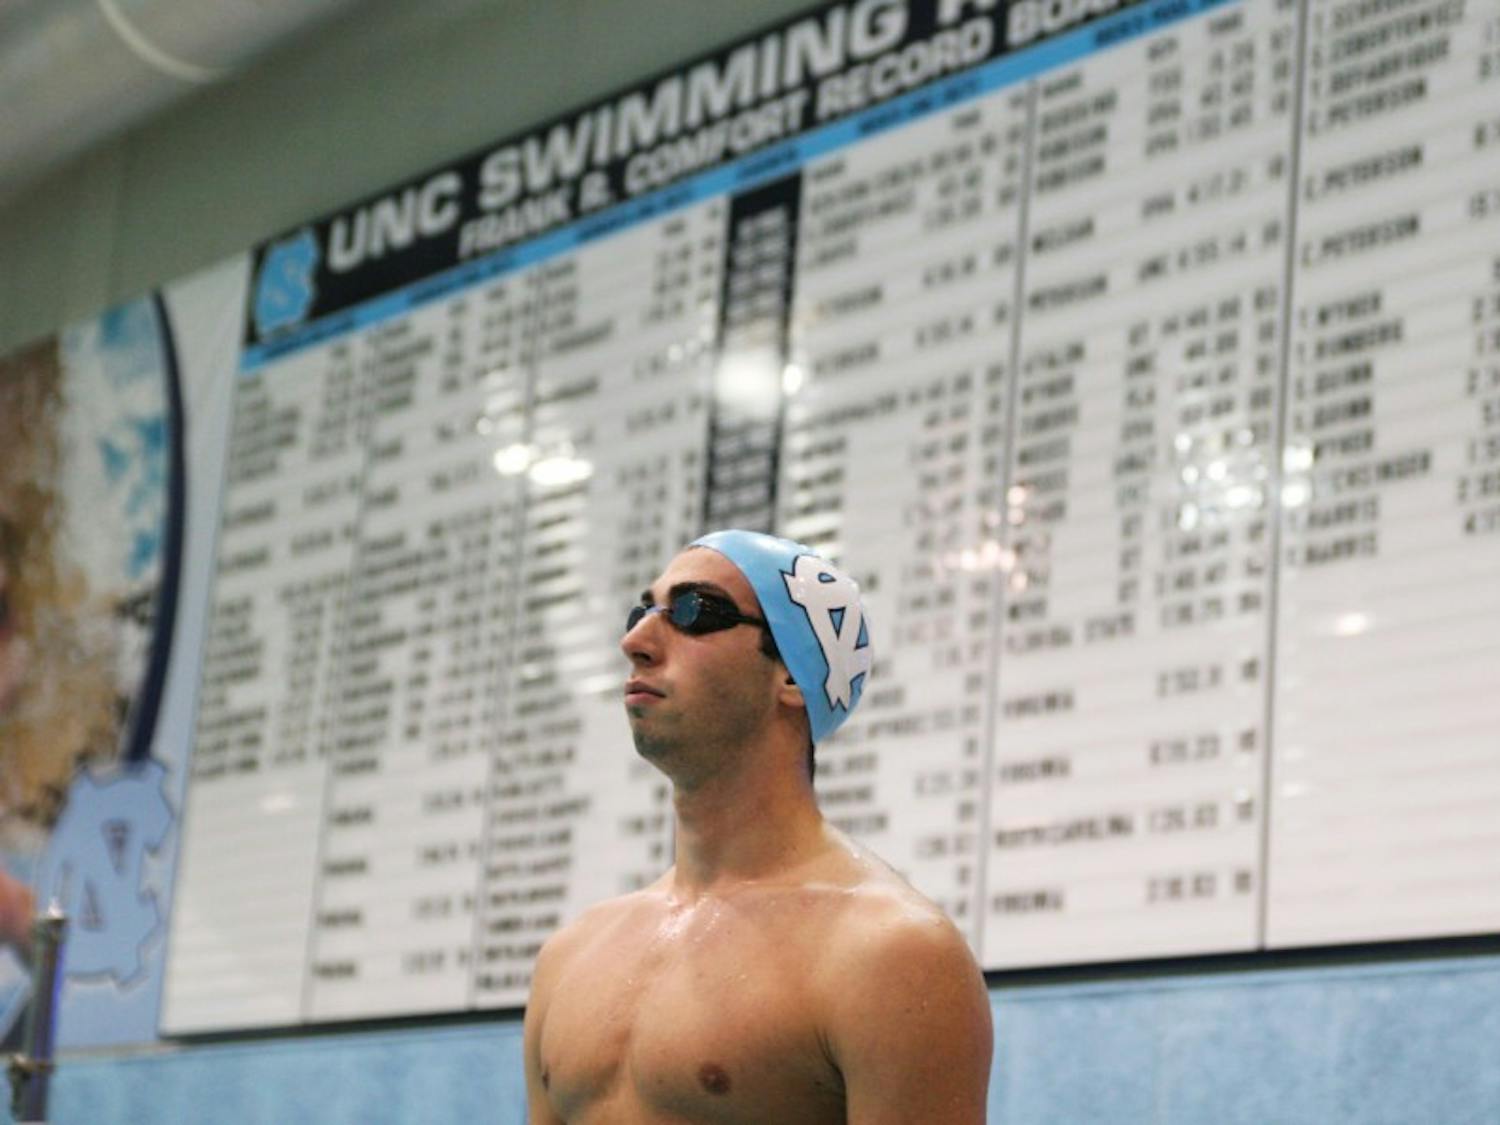 Colin Bridier is gunning for the North Carolina record books while he still has time in Chapel Hill. The French foreign exchange student is grappling with the decision to return to UNC next year. He’s already broken one teammate’s 100-yard breaststroke record despite sitting out the first two meets due to compliance and eligibility issues with the NCAA.